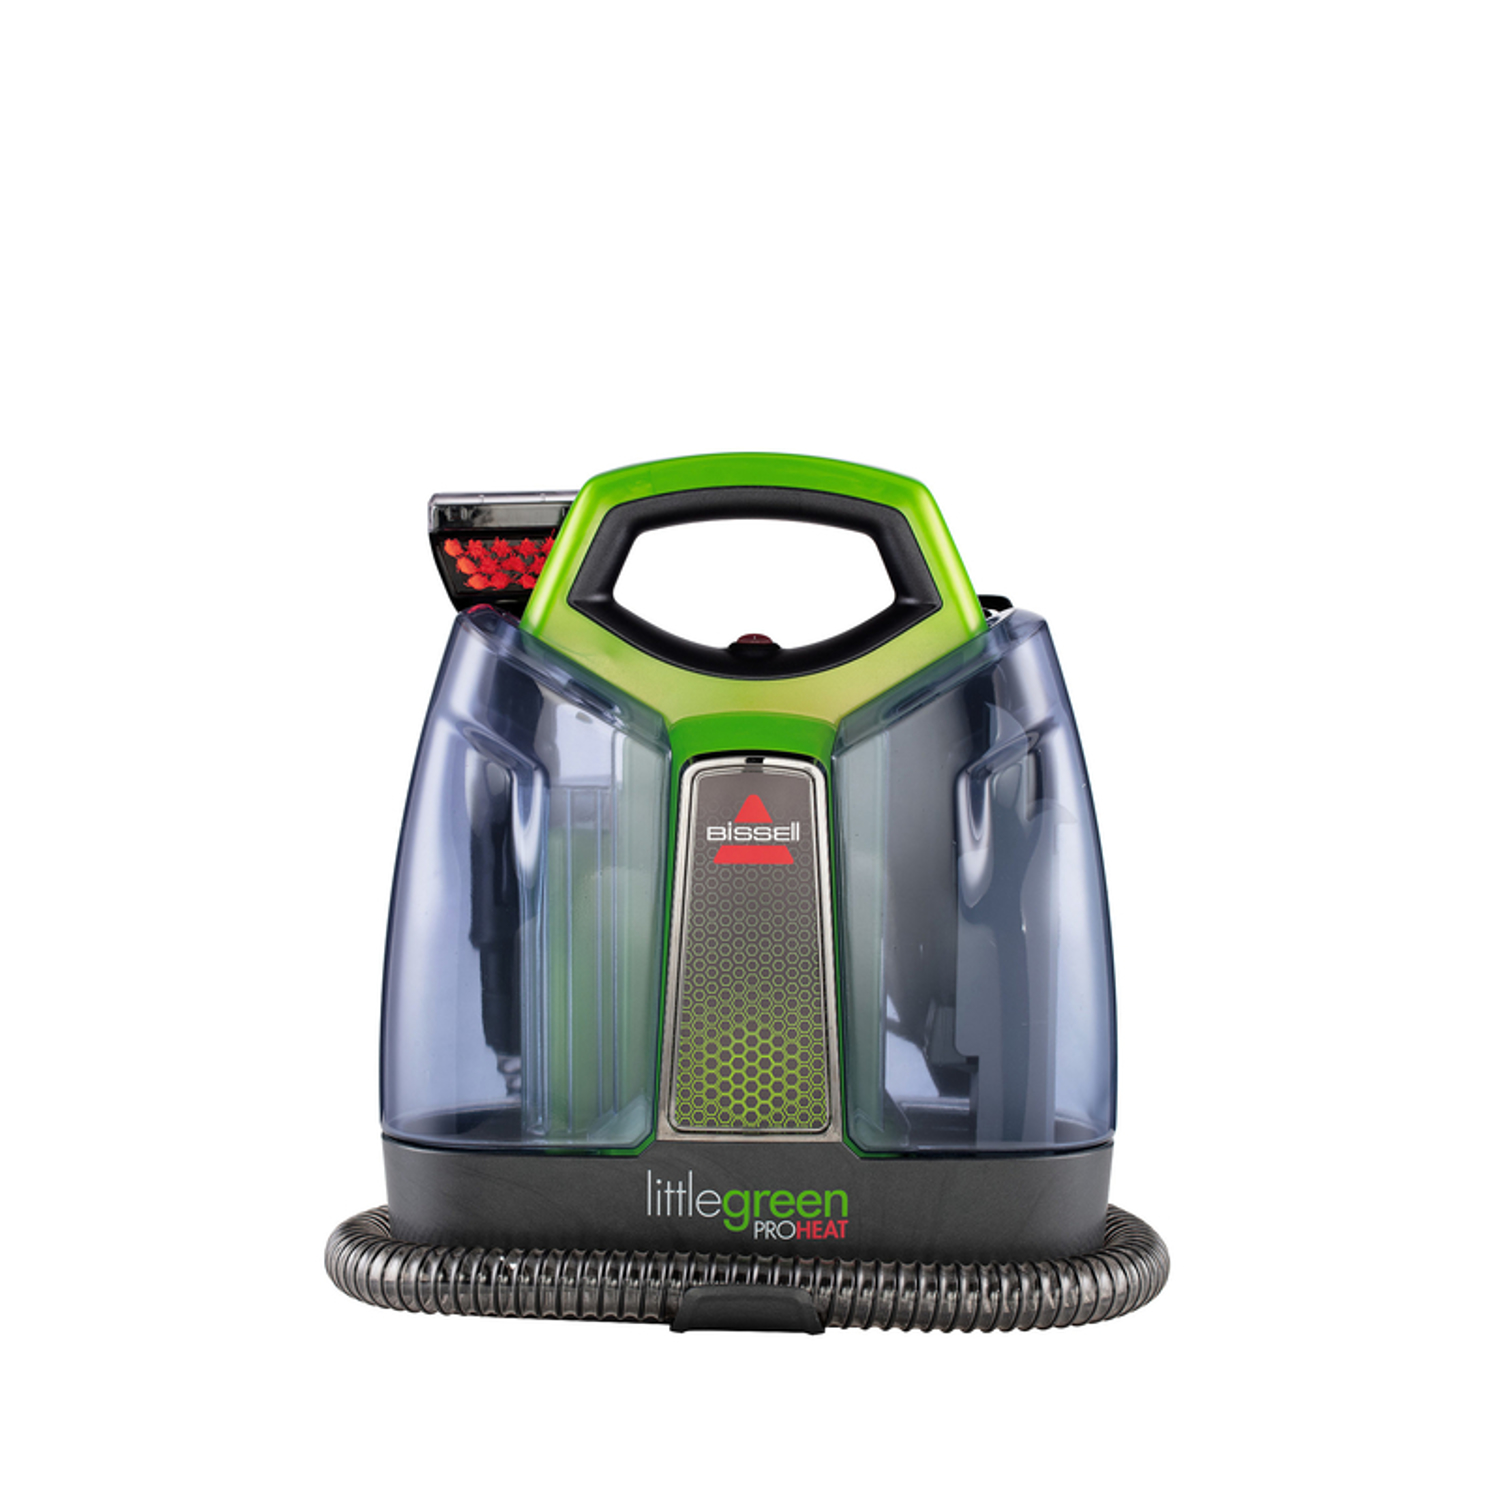 Photos - Vacuum Cleaner BISSELL Little Green ProHeat Bagless Carpet Cleaner 3 amps Standard Green 